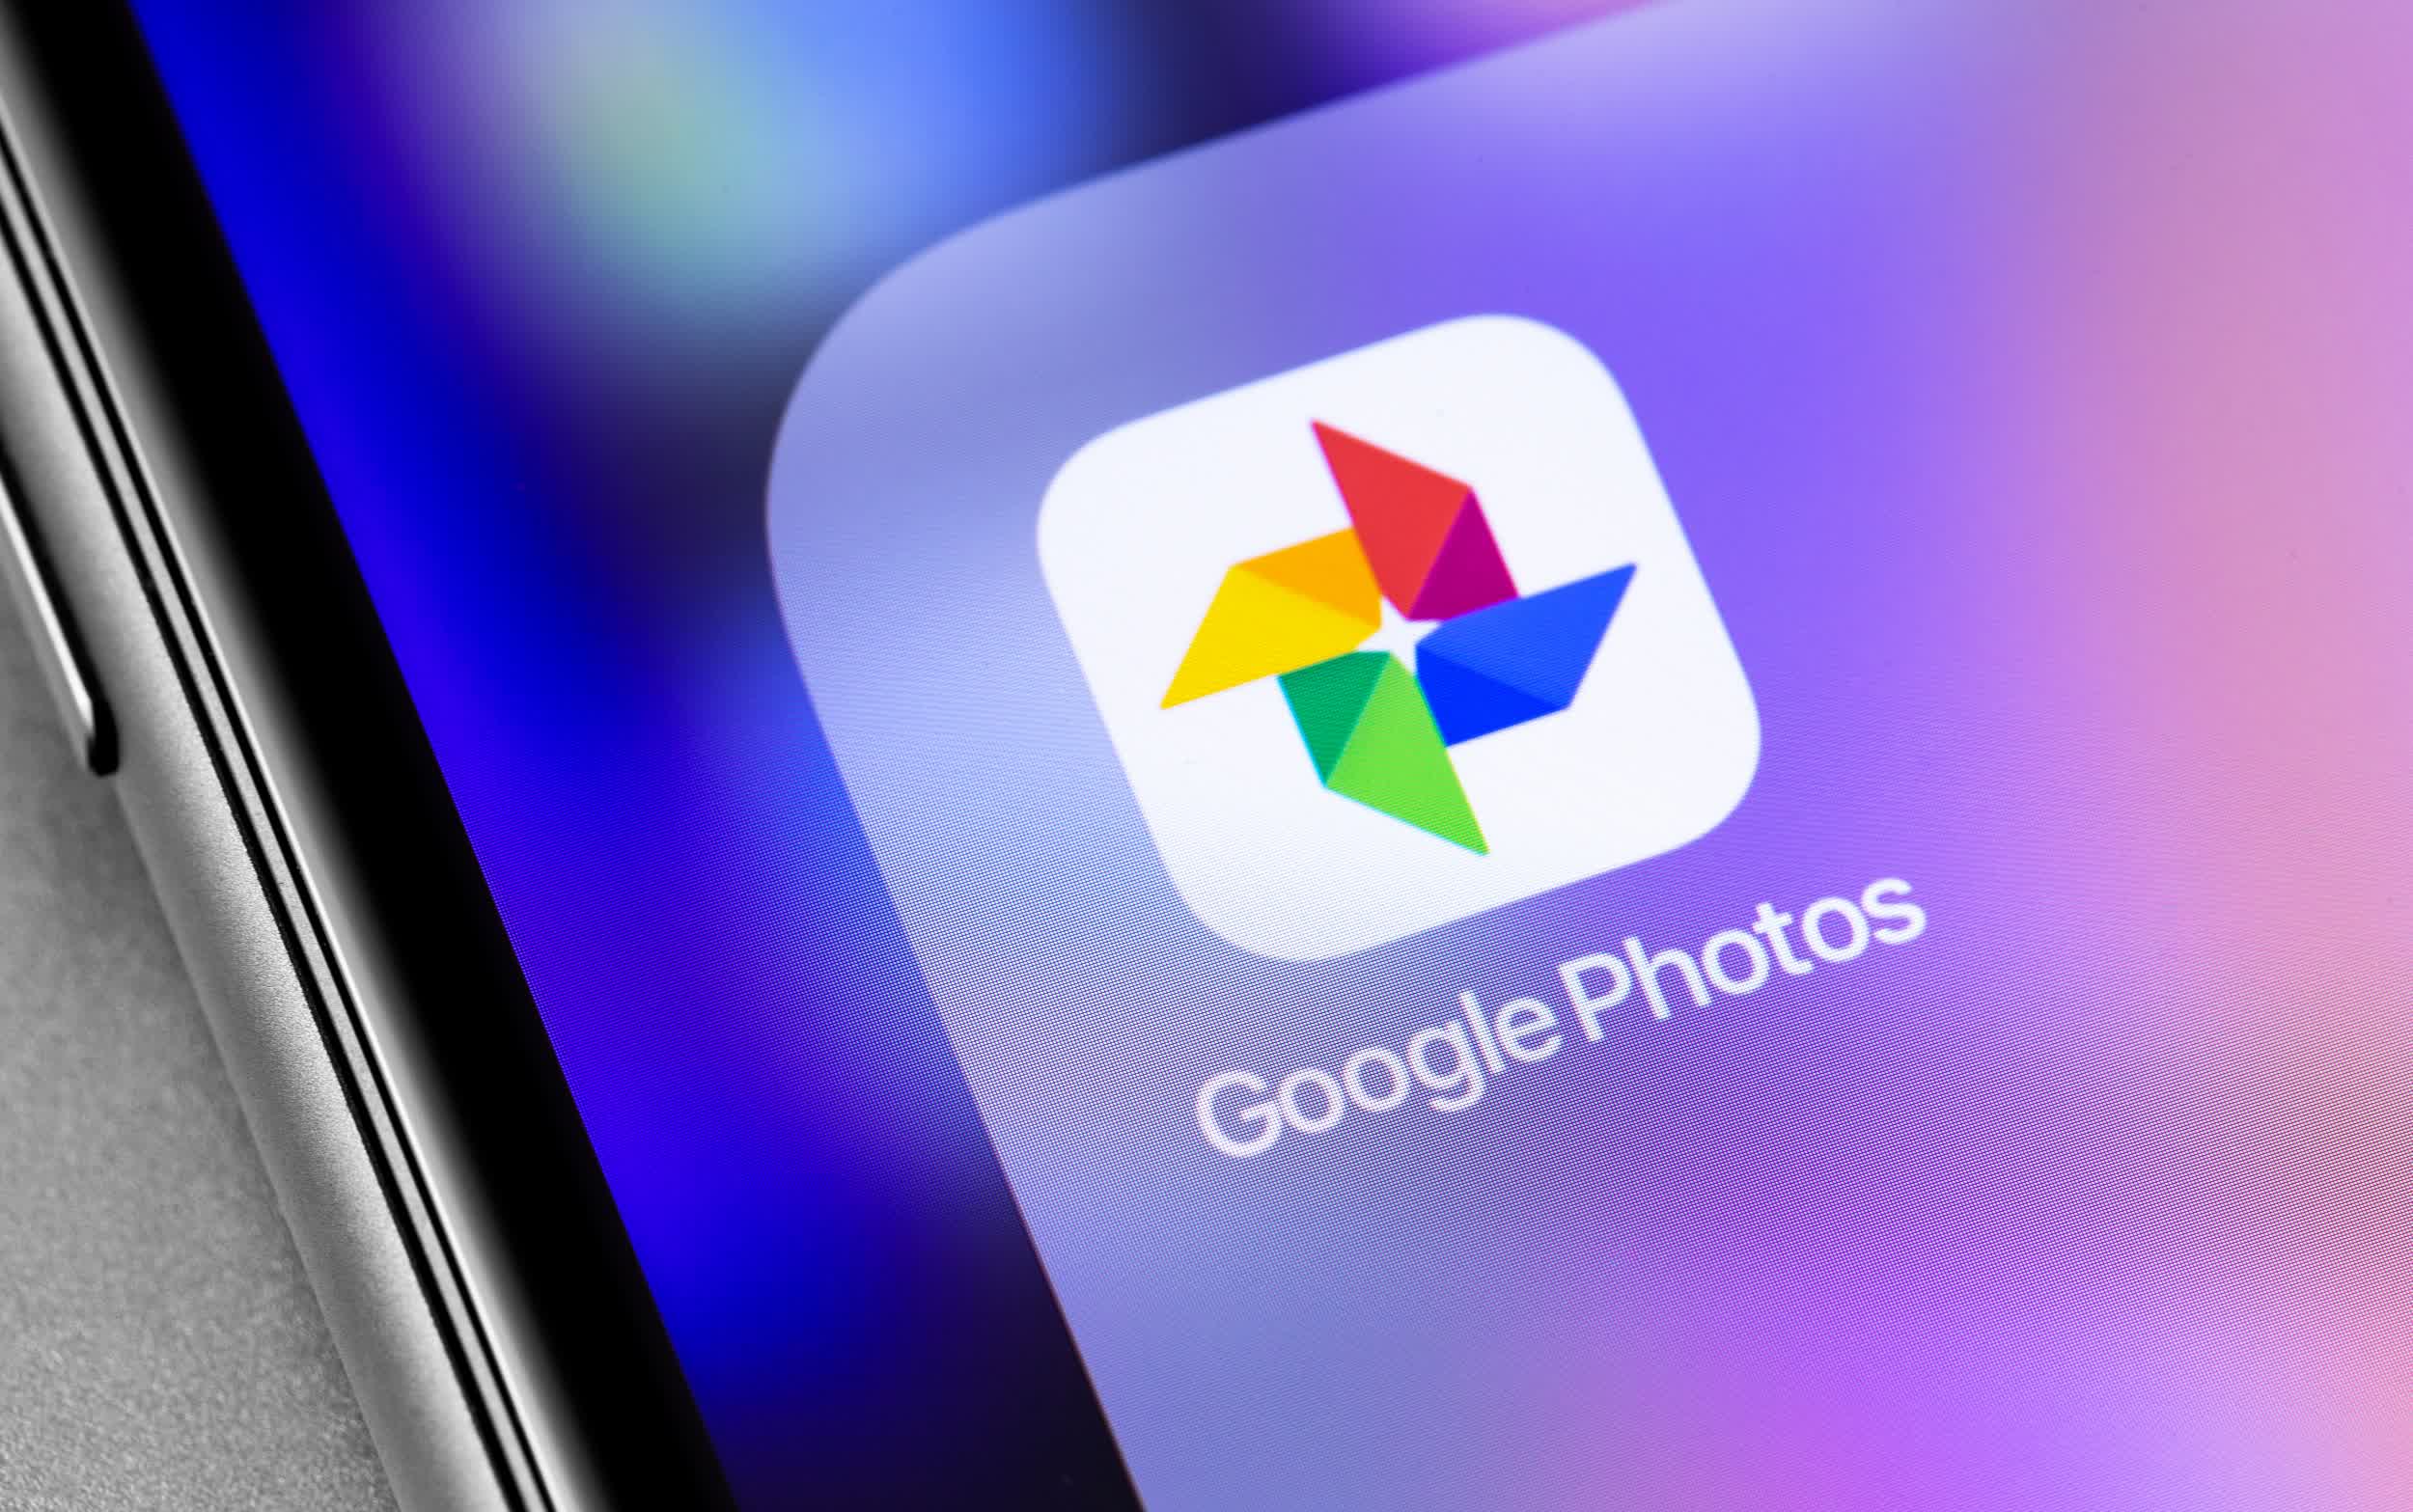 Google Photos will end its free unlimited storage on June 1st, 2021